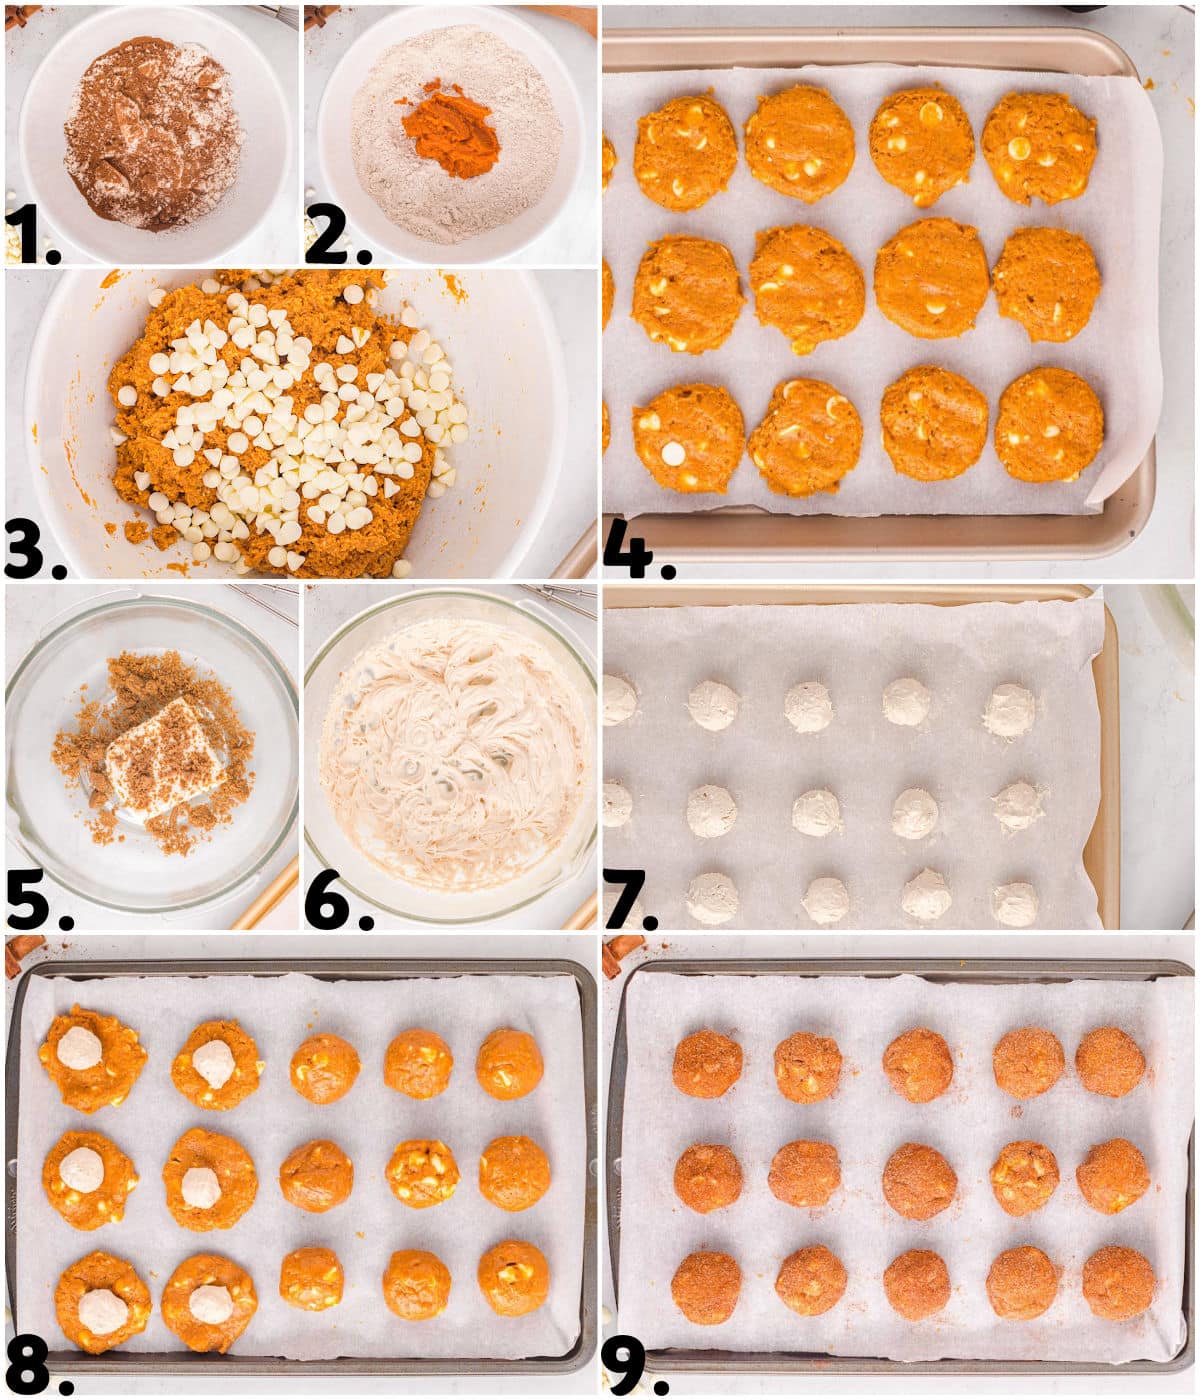 nine image collage showing how to make the pumpkin cookies with cheesecake filling step by step.